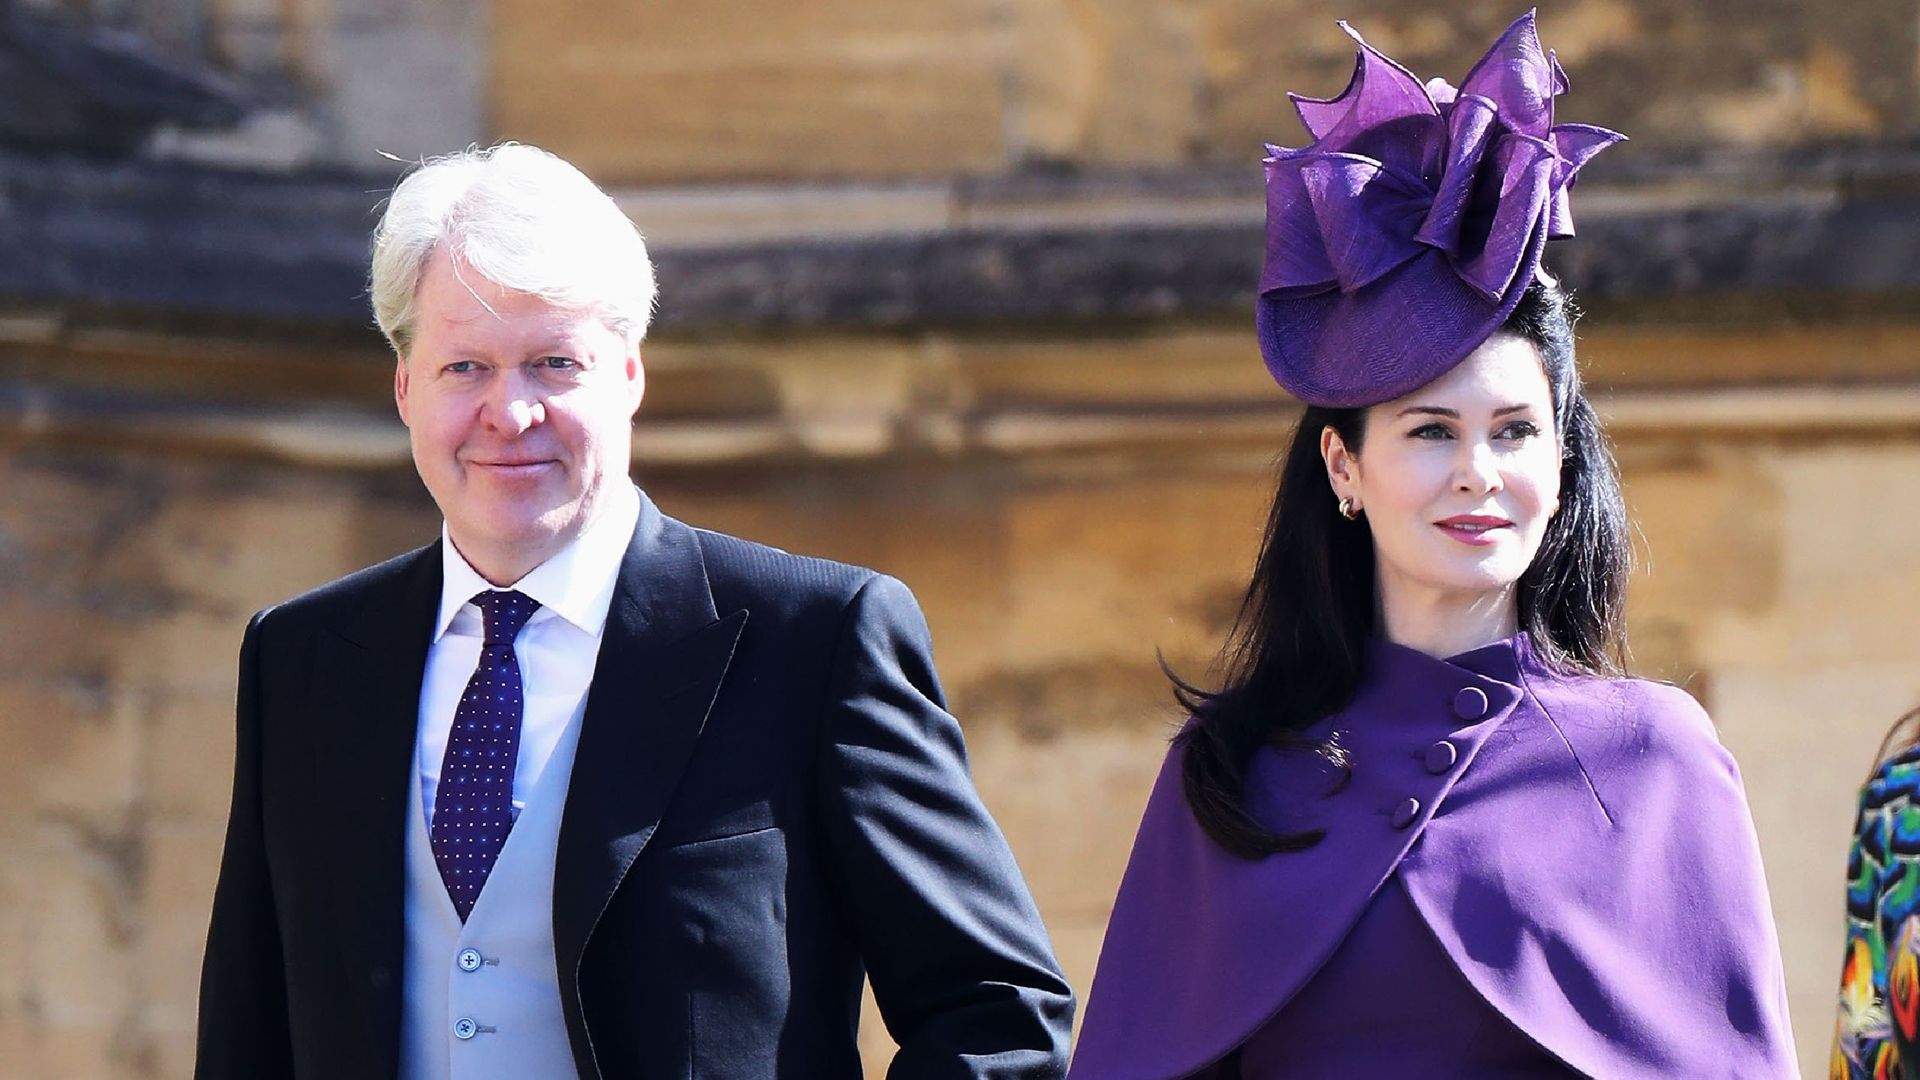 Charles Spencer, 9th Earl Spencer (L) and his wife, Karen Spencer arrive for the wedding ceremony of Britain's Prince Harry, Duke of Sussex and US actress Meghan Markle 